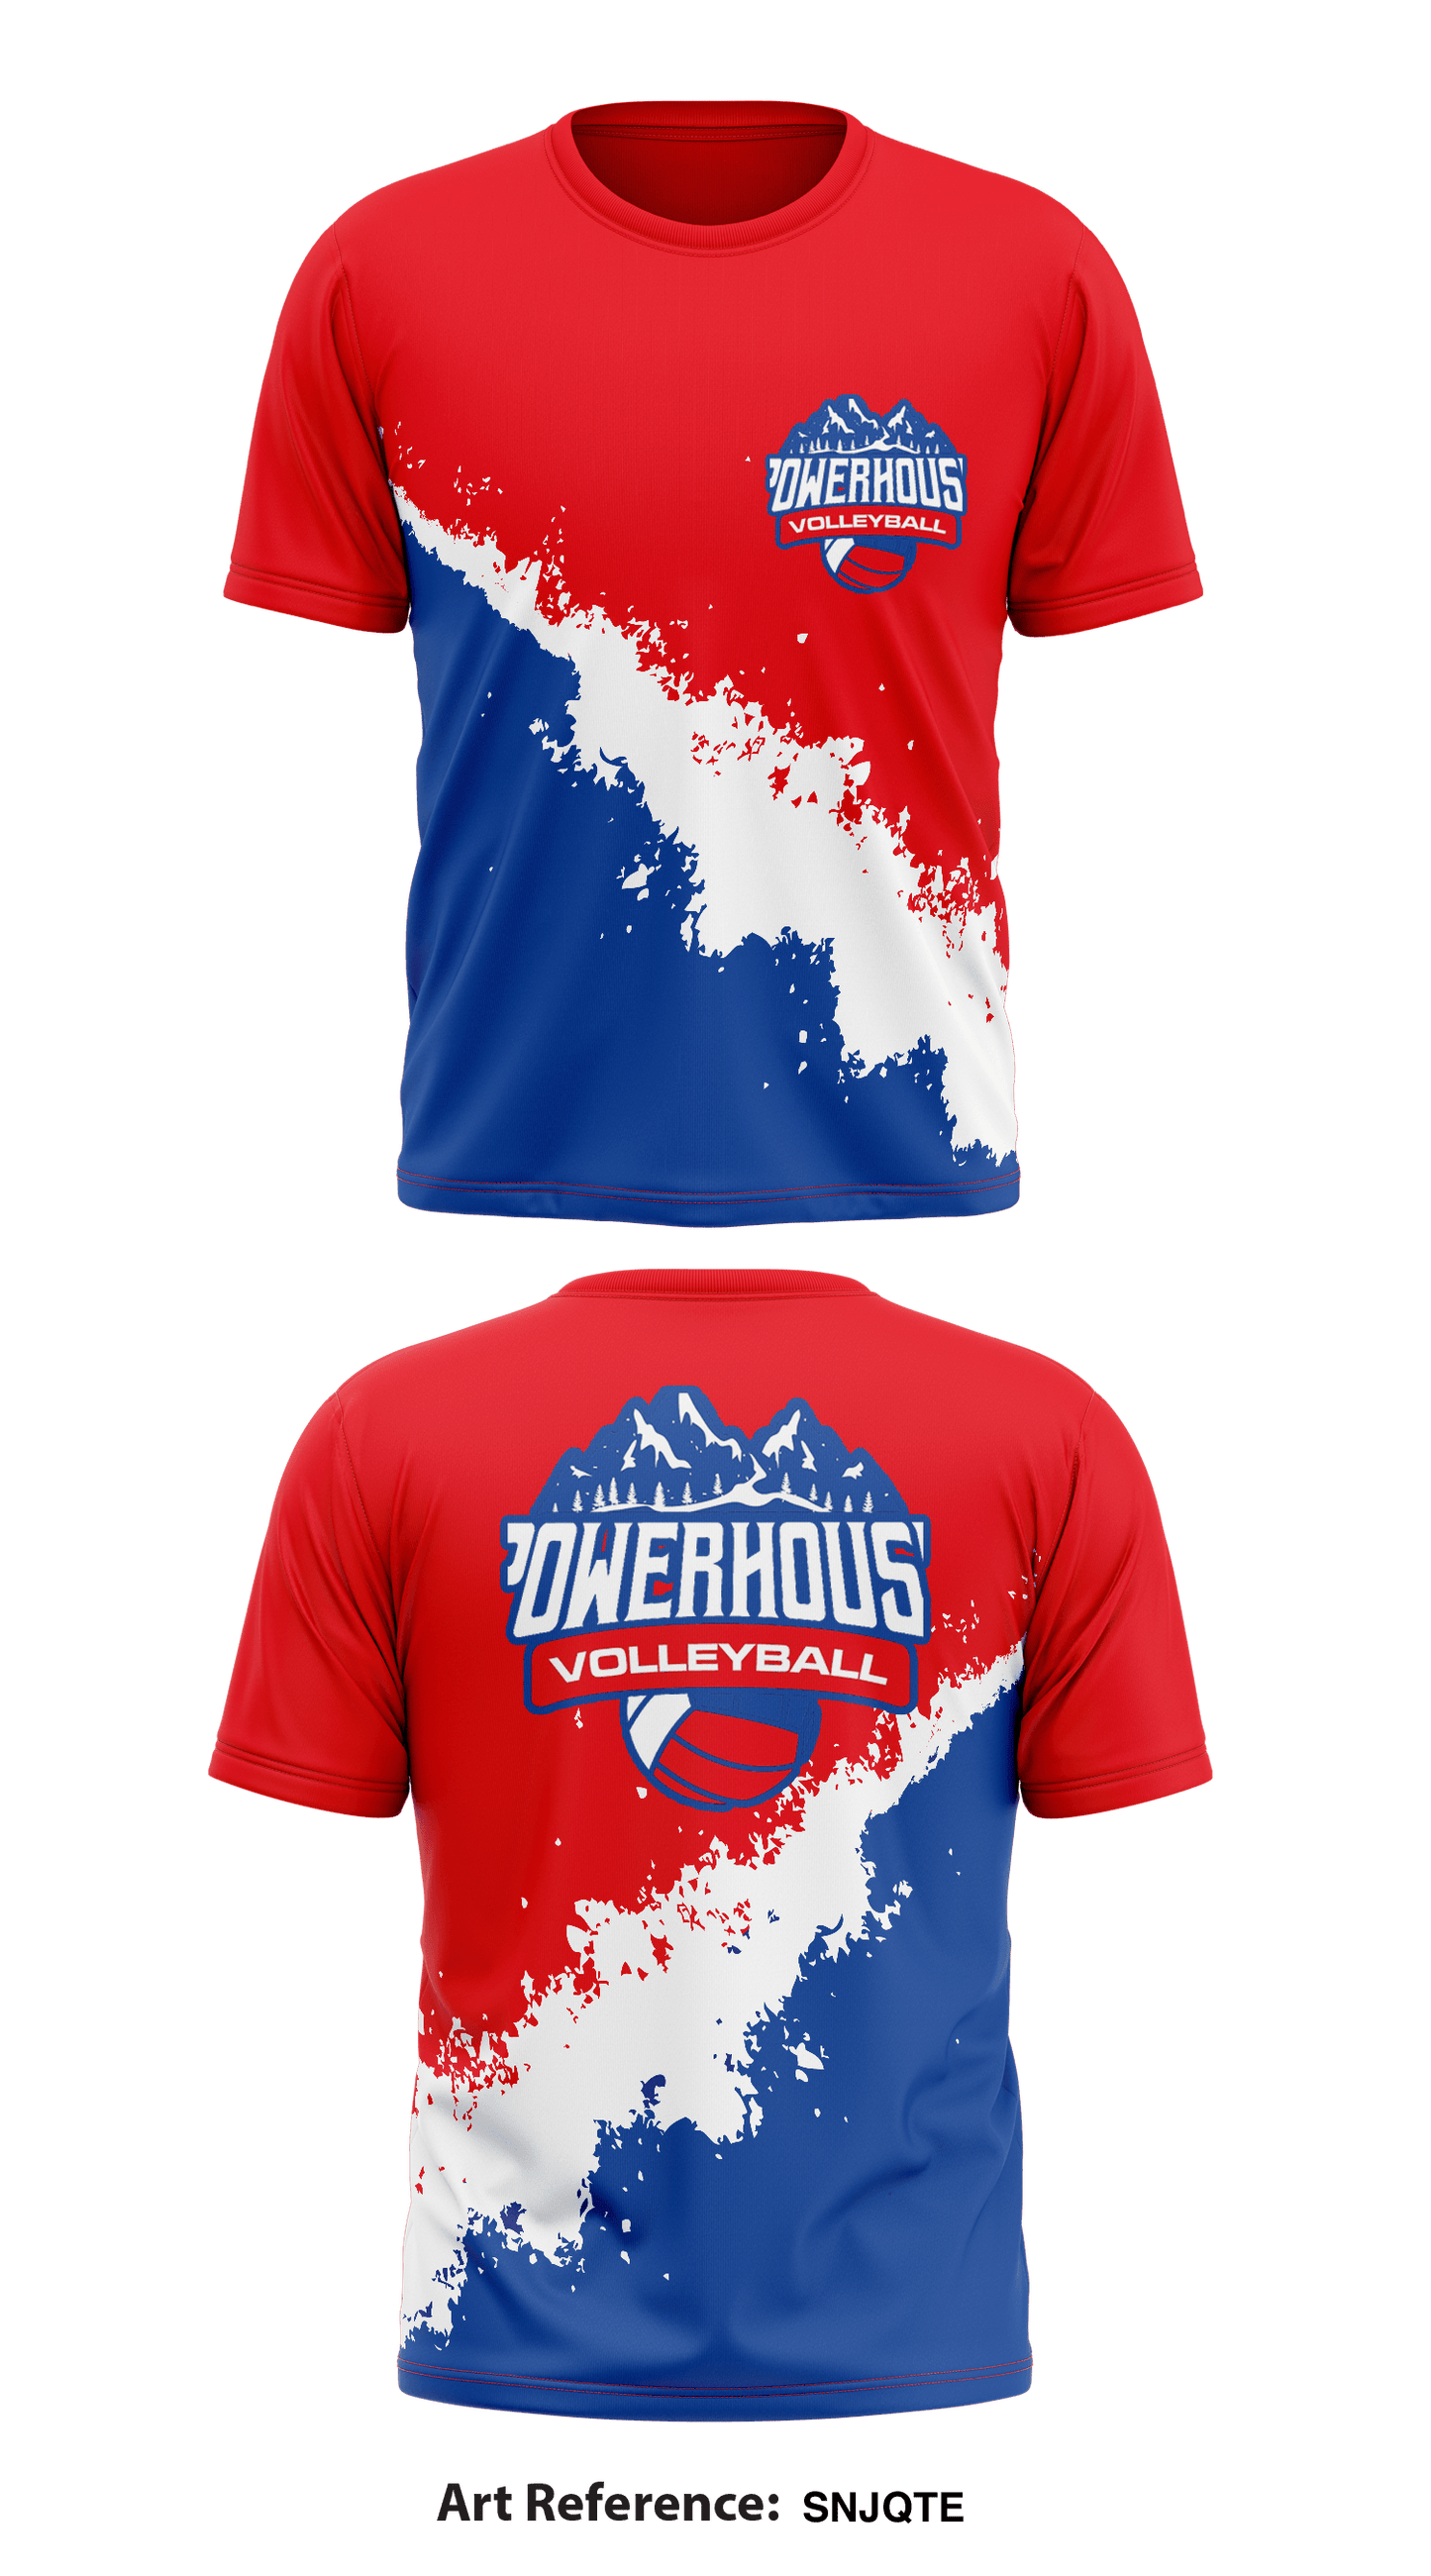 Powerhouse Volleyball Store 1 Core Men's SS Performance Tee - snjQTe